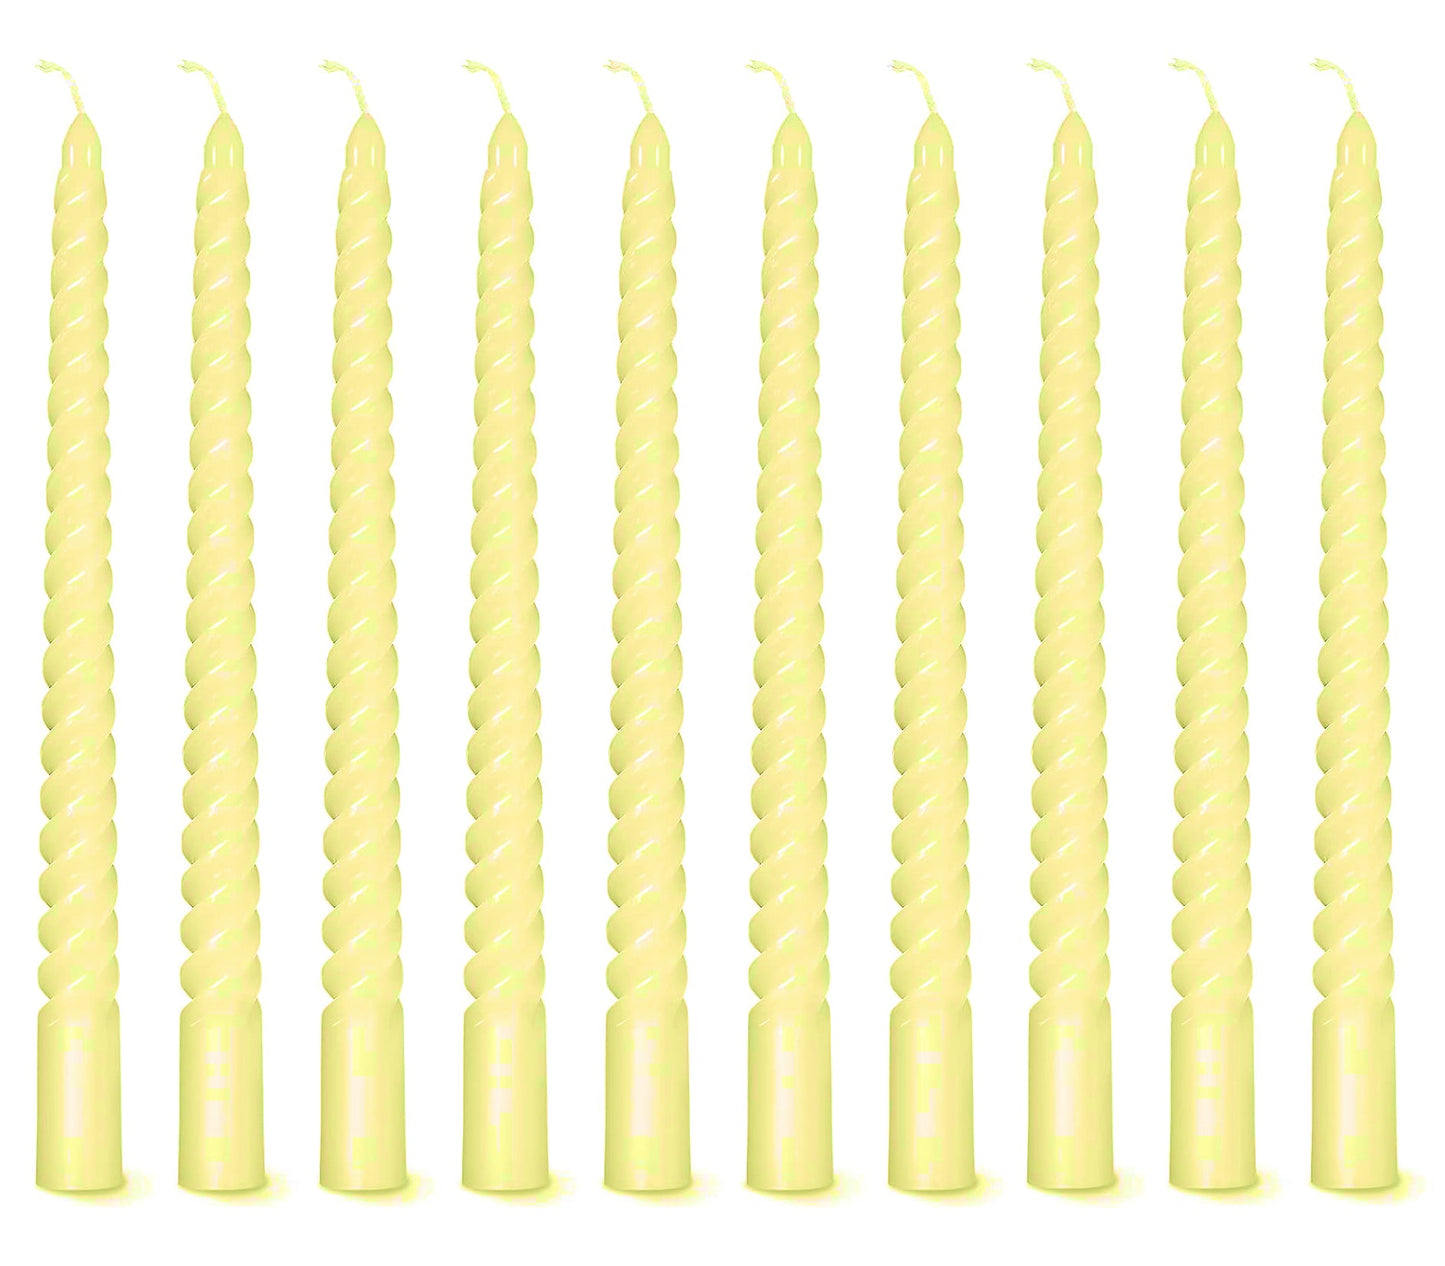 Bulk Buy AuraDecor Spiral Taper Candles Set of 10, Unscented Dripless Candlesticks, 10 Inch (Master pack of 20 box-200pcs)